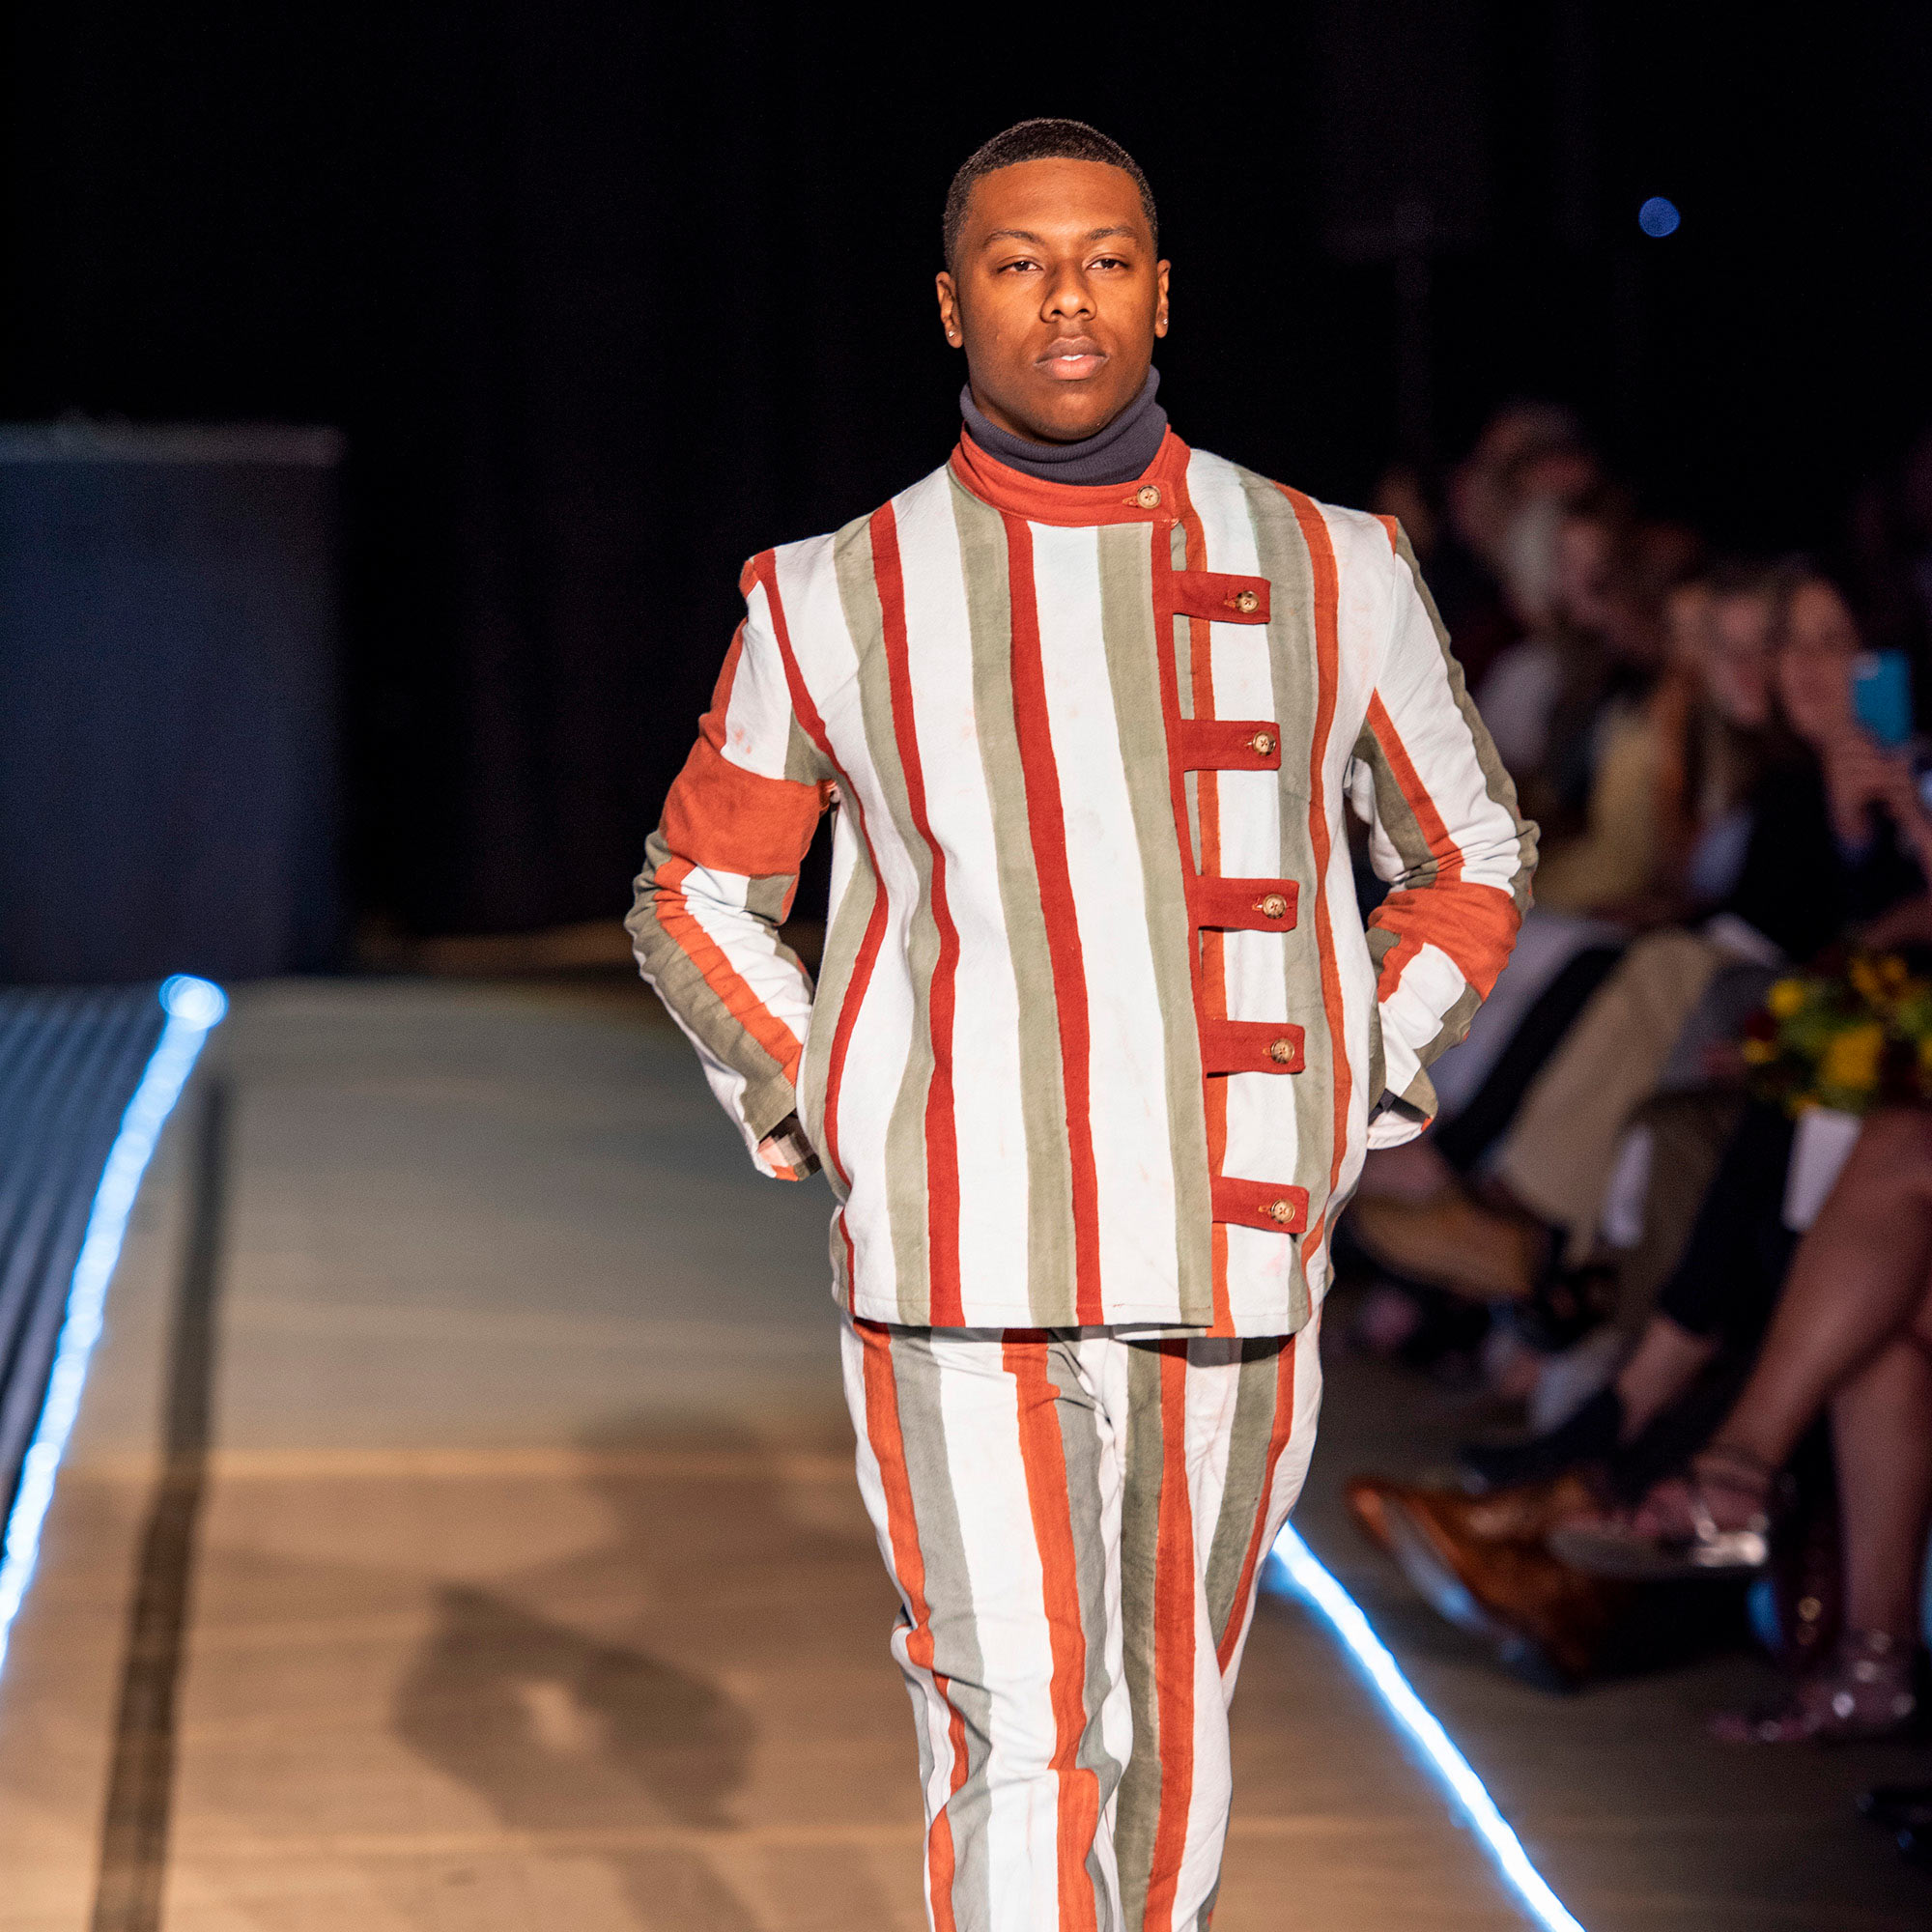 Model walking the runway in a grey, red and white striped jacket and pants during The Fashion Event: Mod.